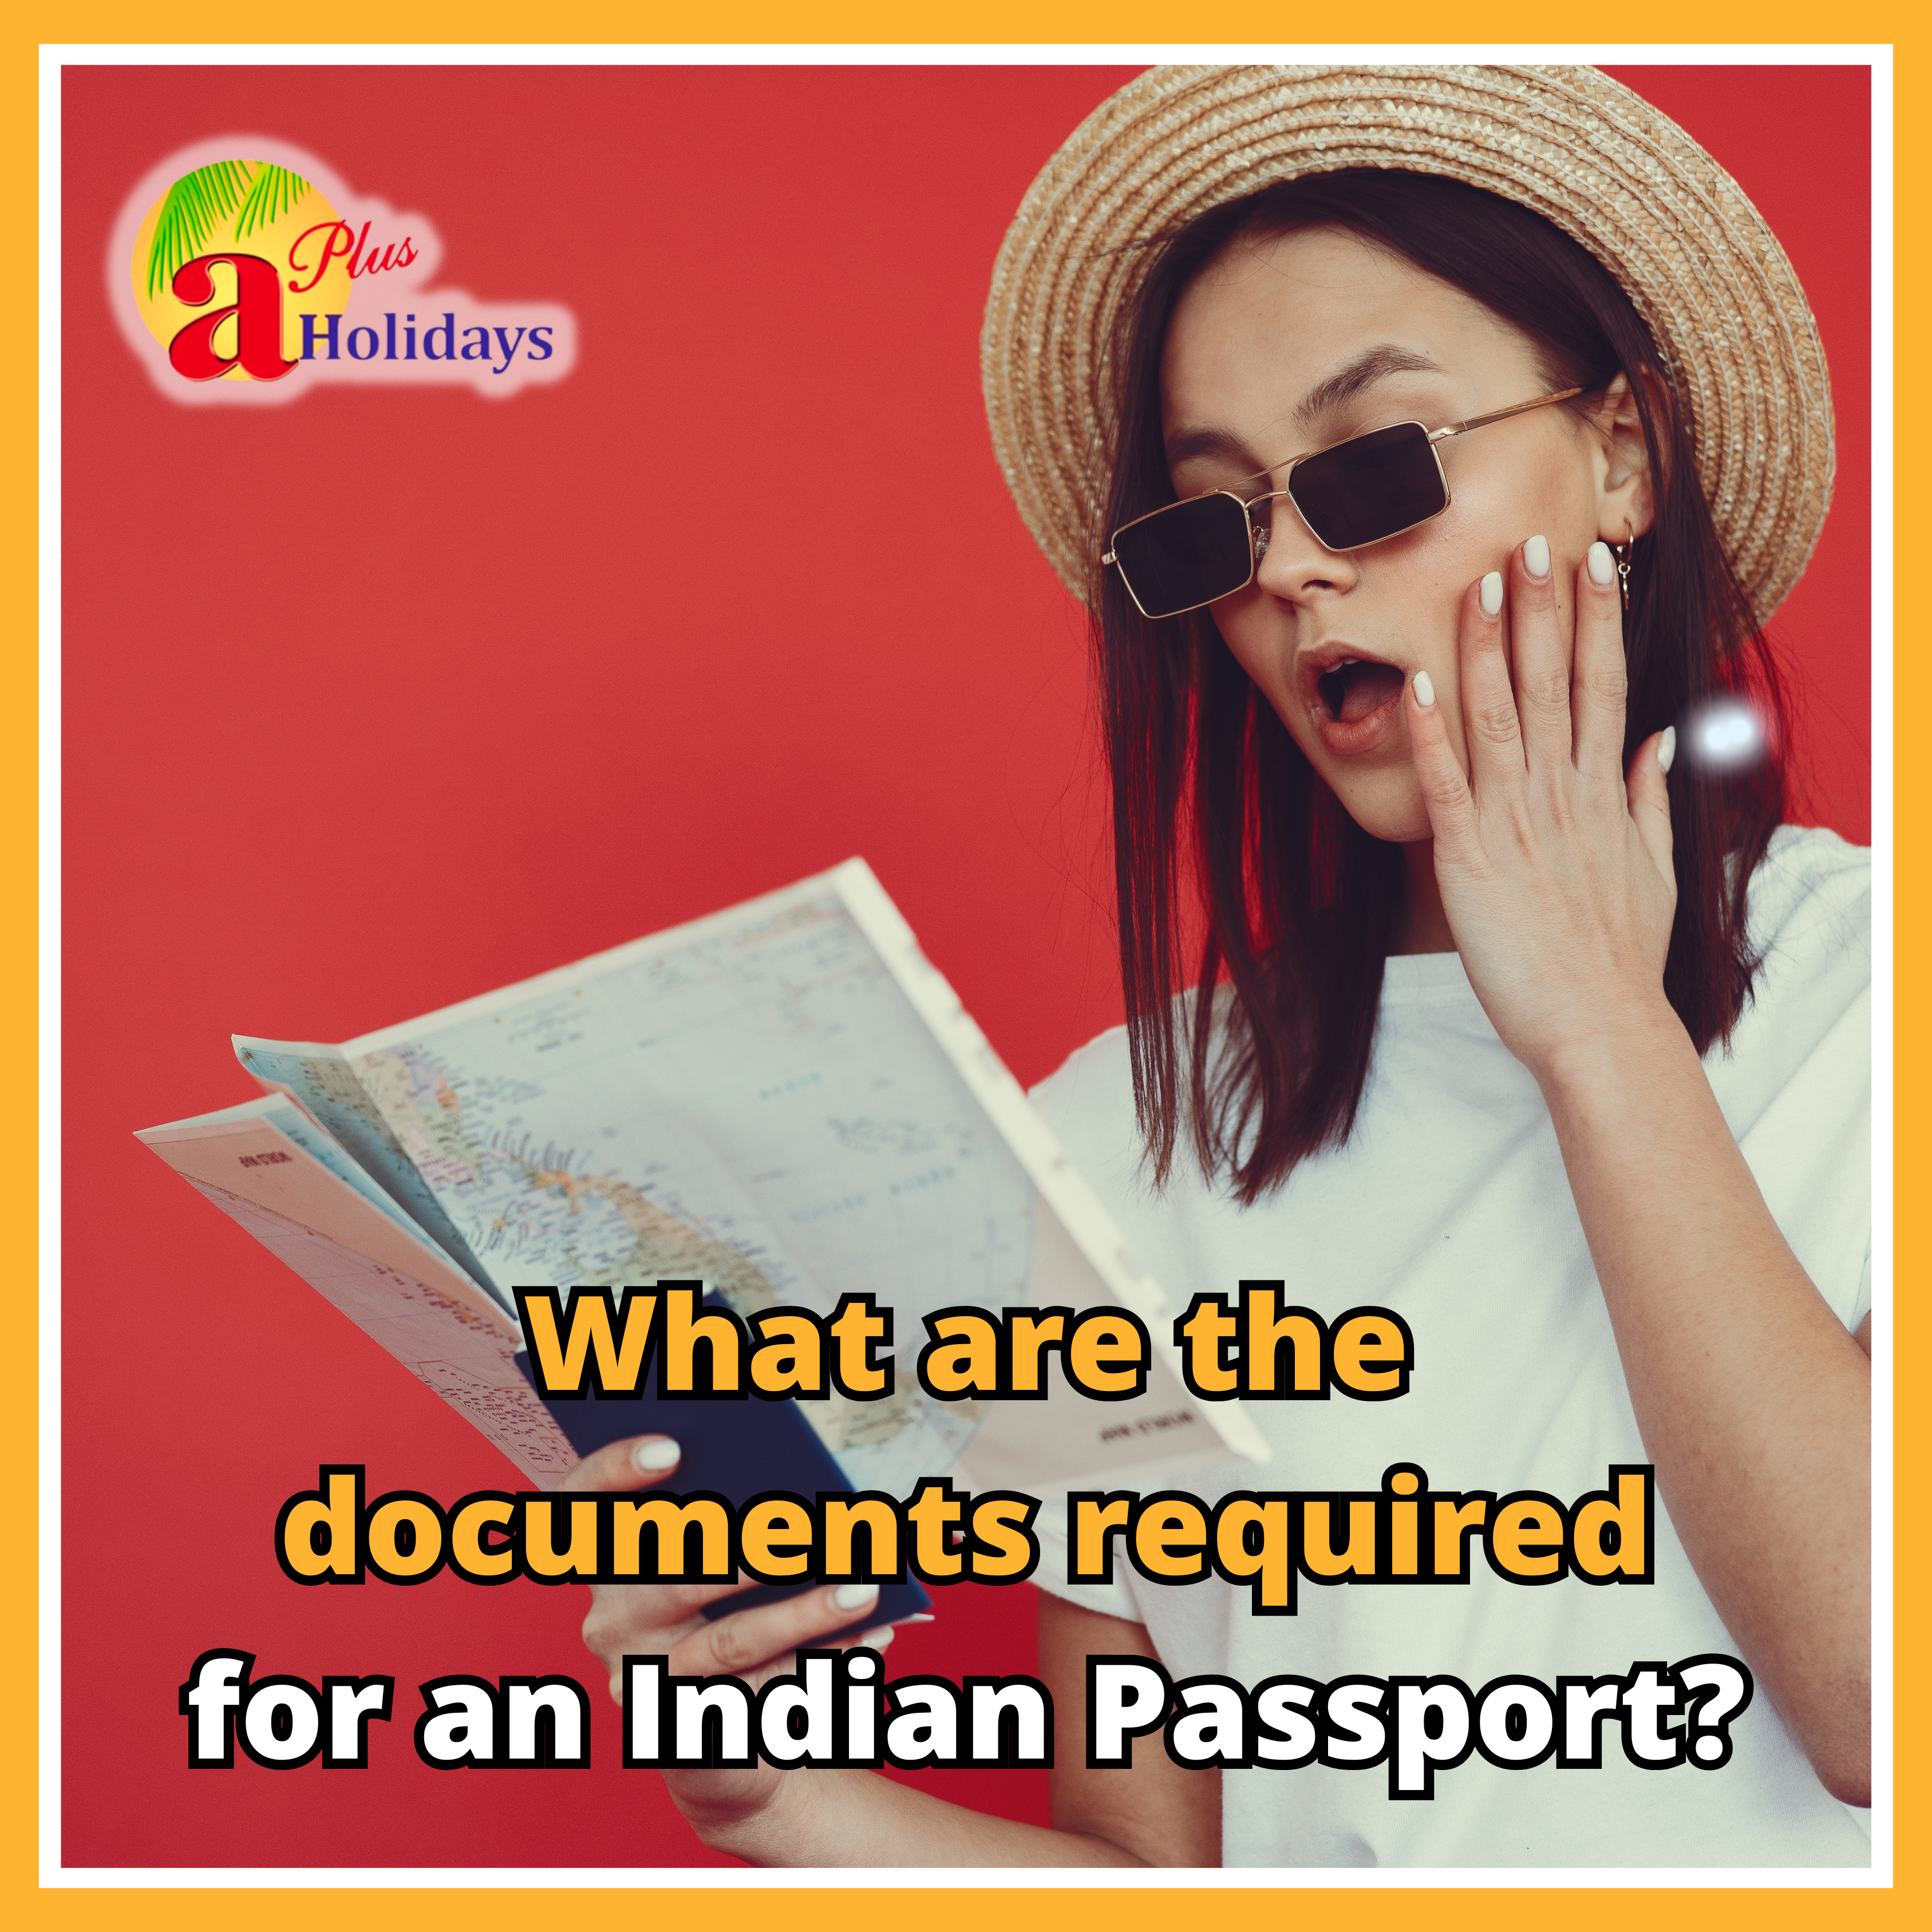 What are the documents required for passport?